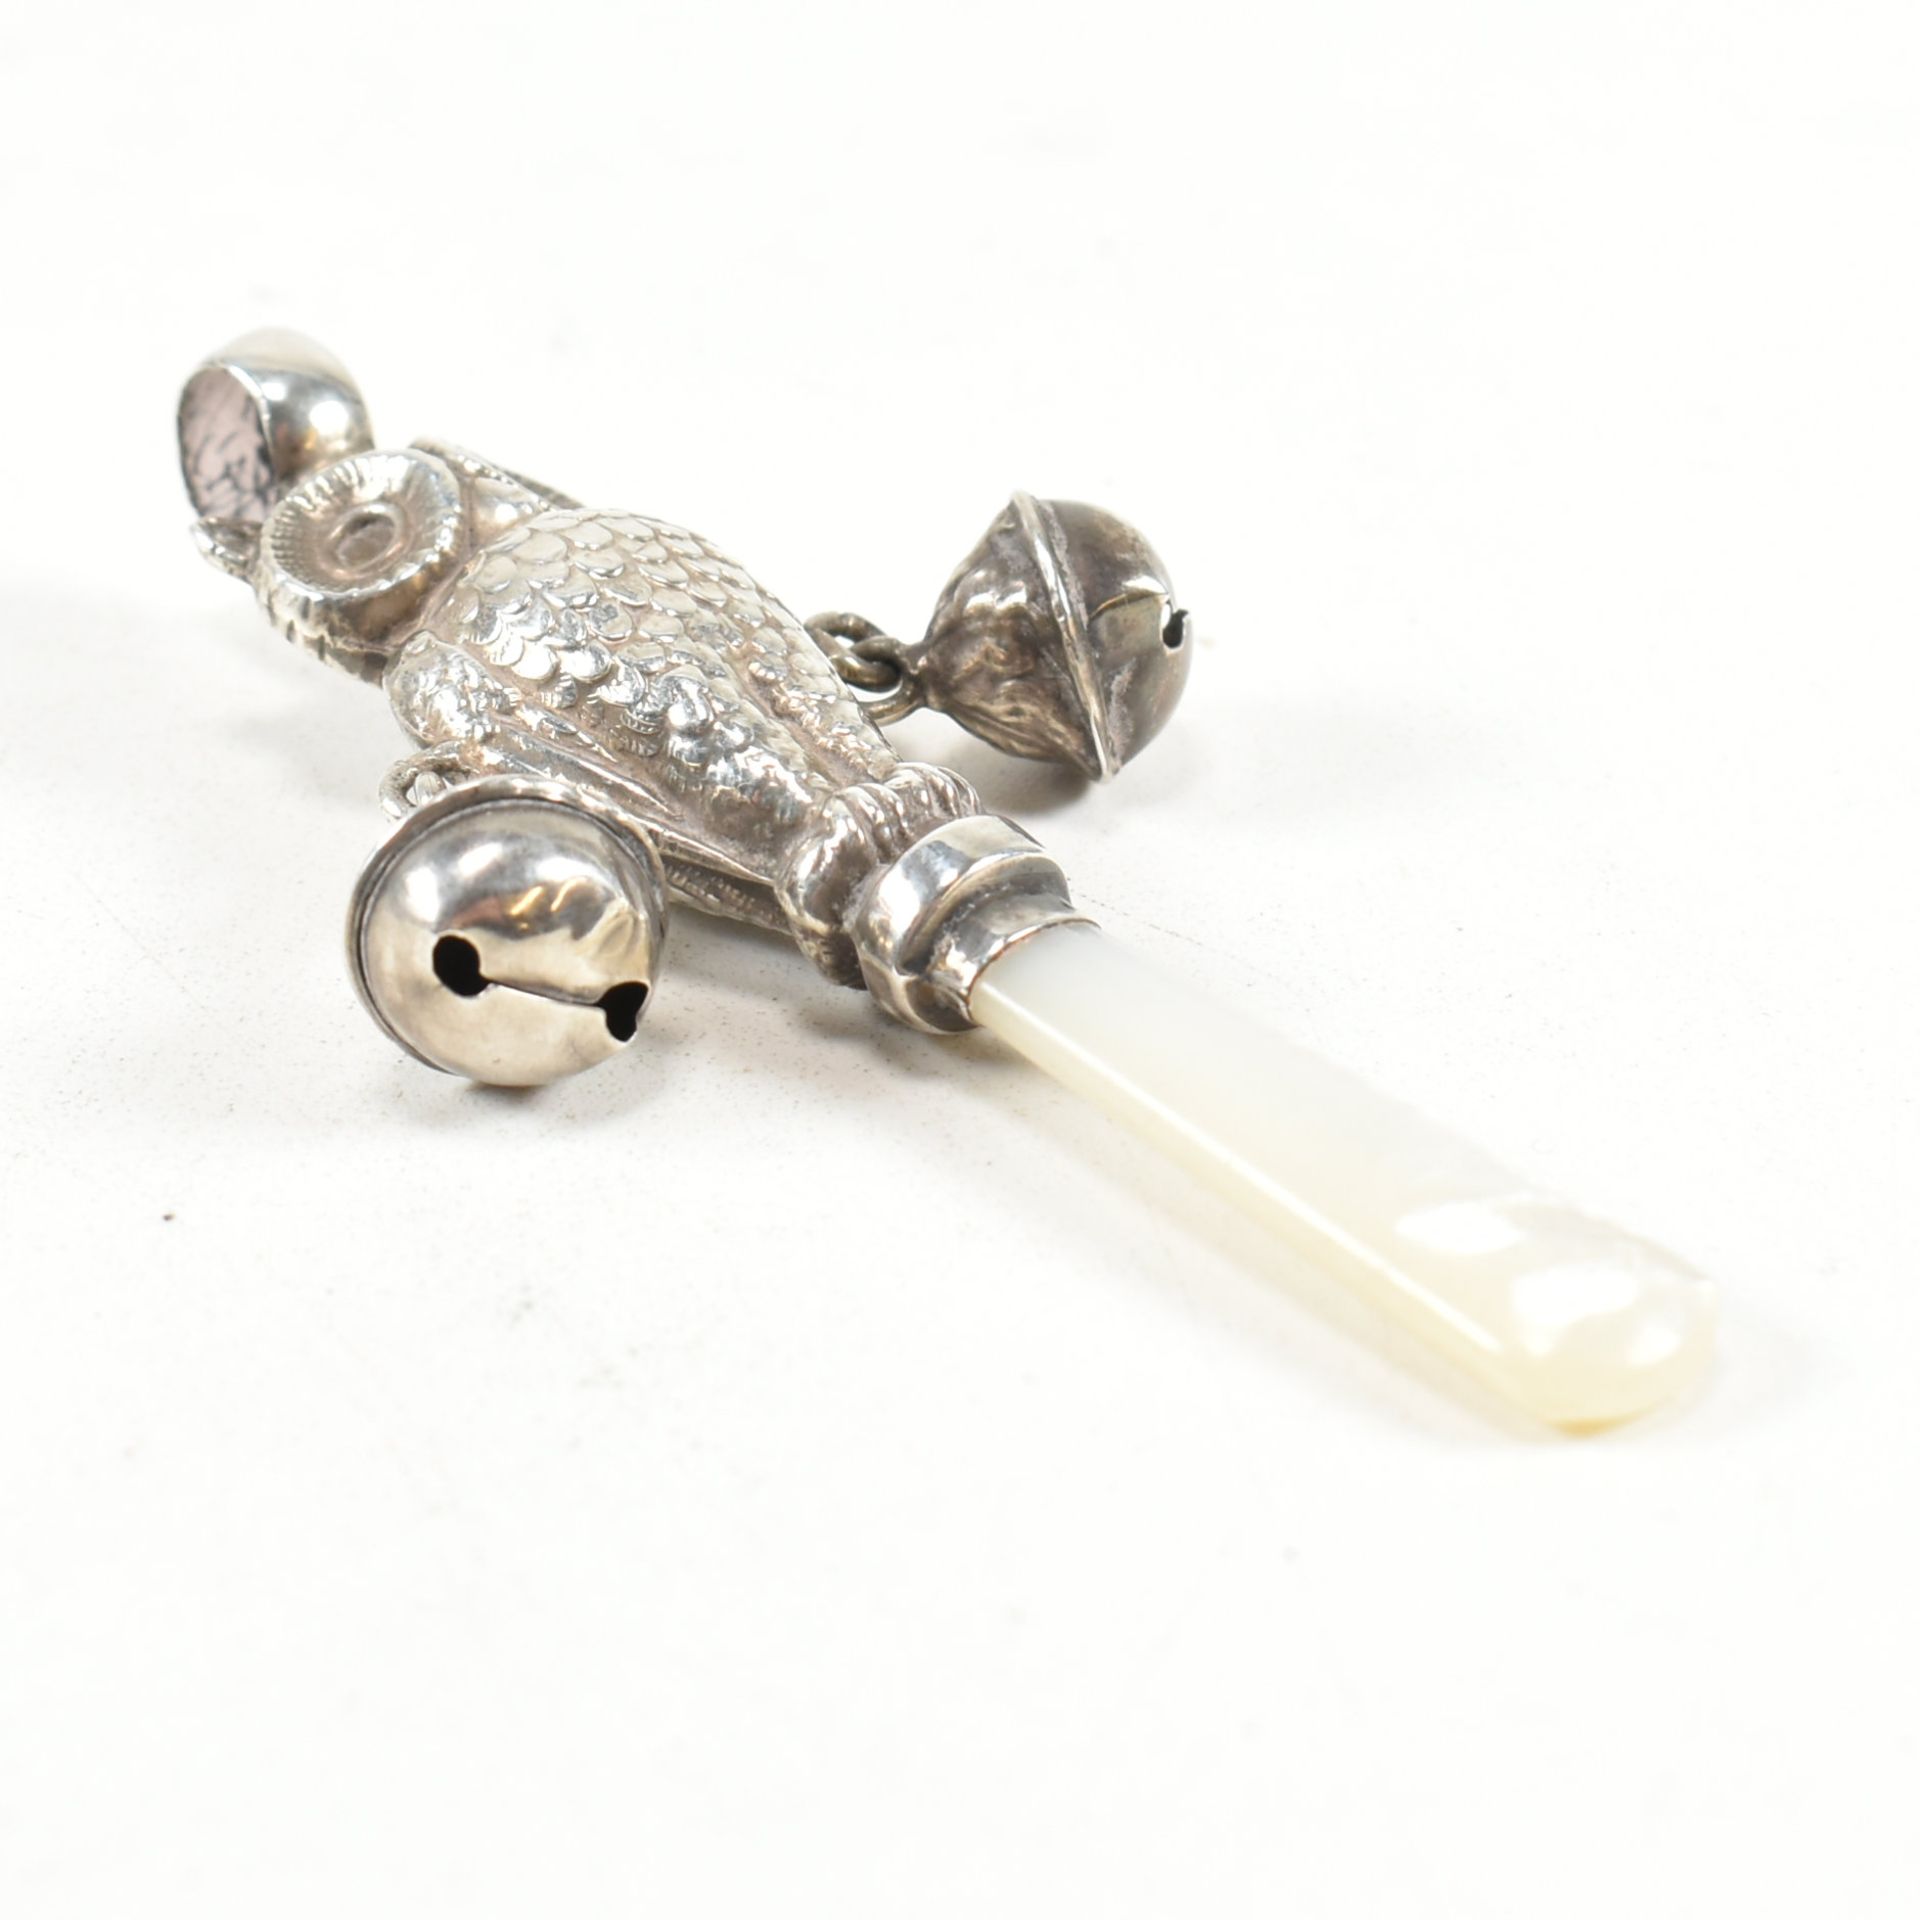 EARLY 20TH CENTURY SILVER OWL RATTLE & MOTHER OF PEARL TEETHER - Image 2 of 4